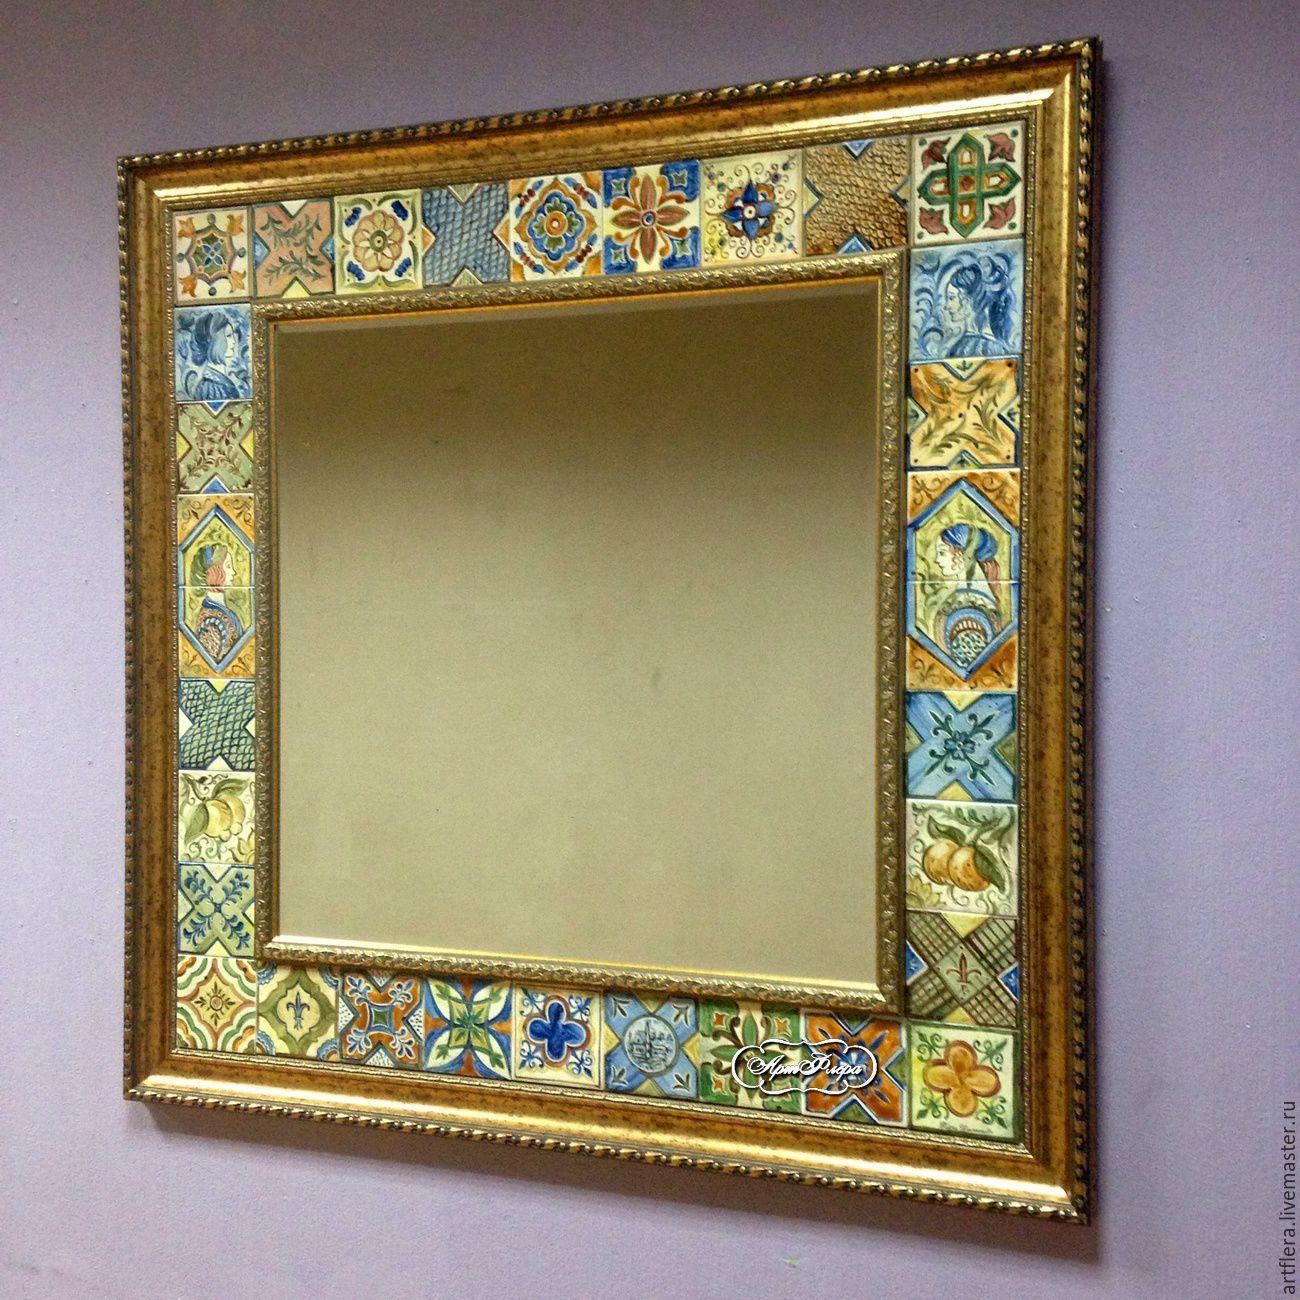 Large Mirror Over Fireplace New Mirror Italian Tiles 3